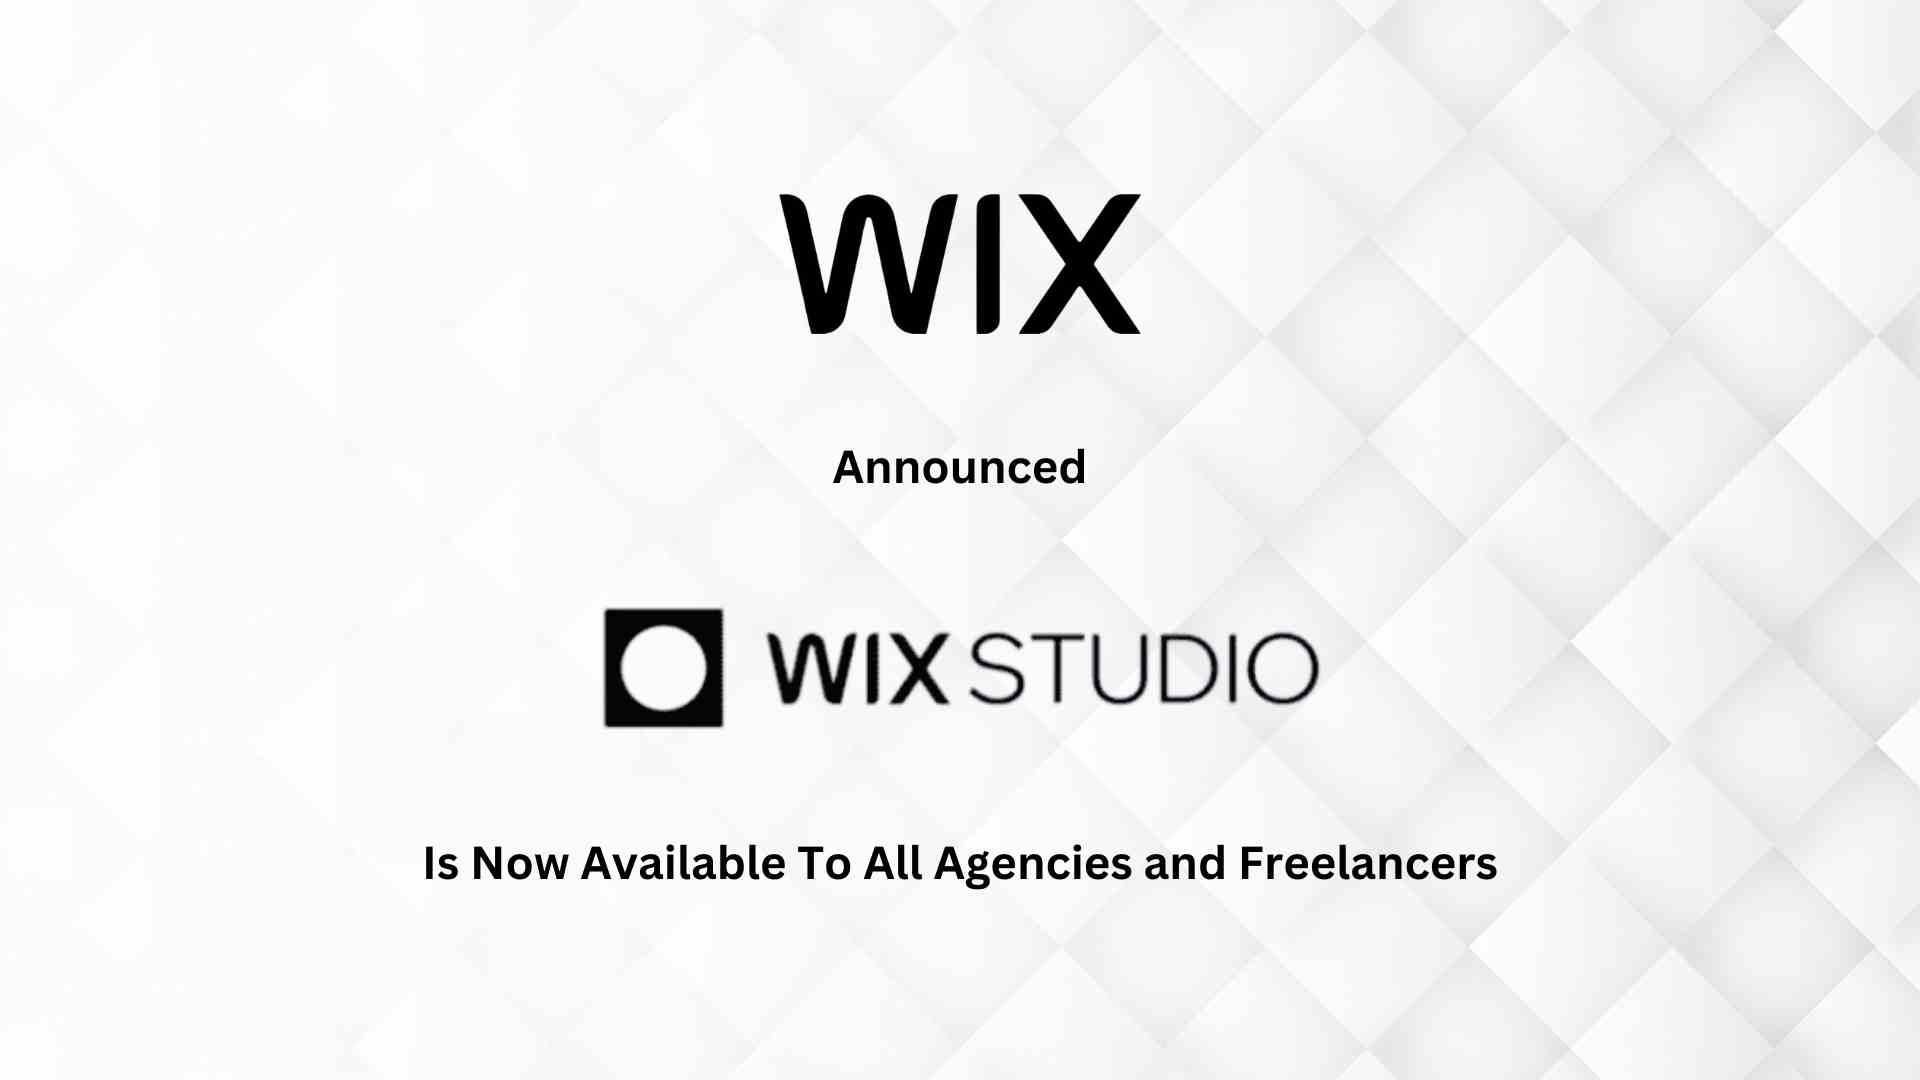 Wix Studio, the Ultimate Web Creation Platform for Agencies and Freelancers, Now Officially Open to All Global Users